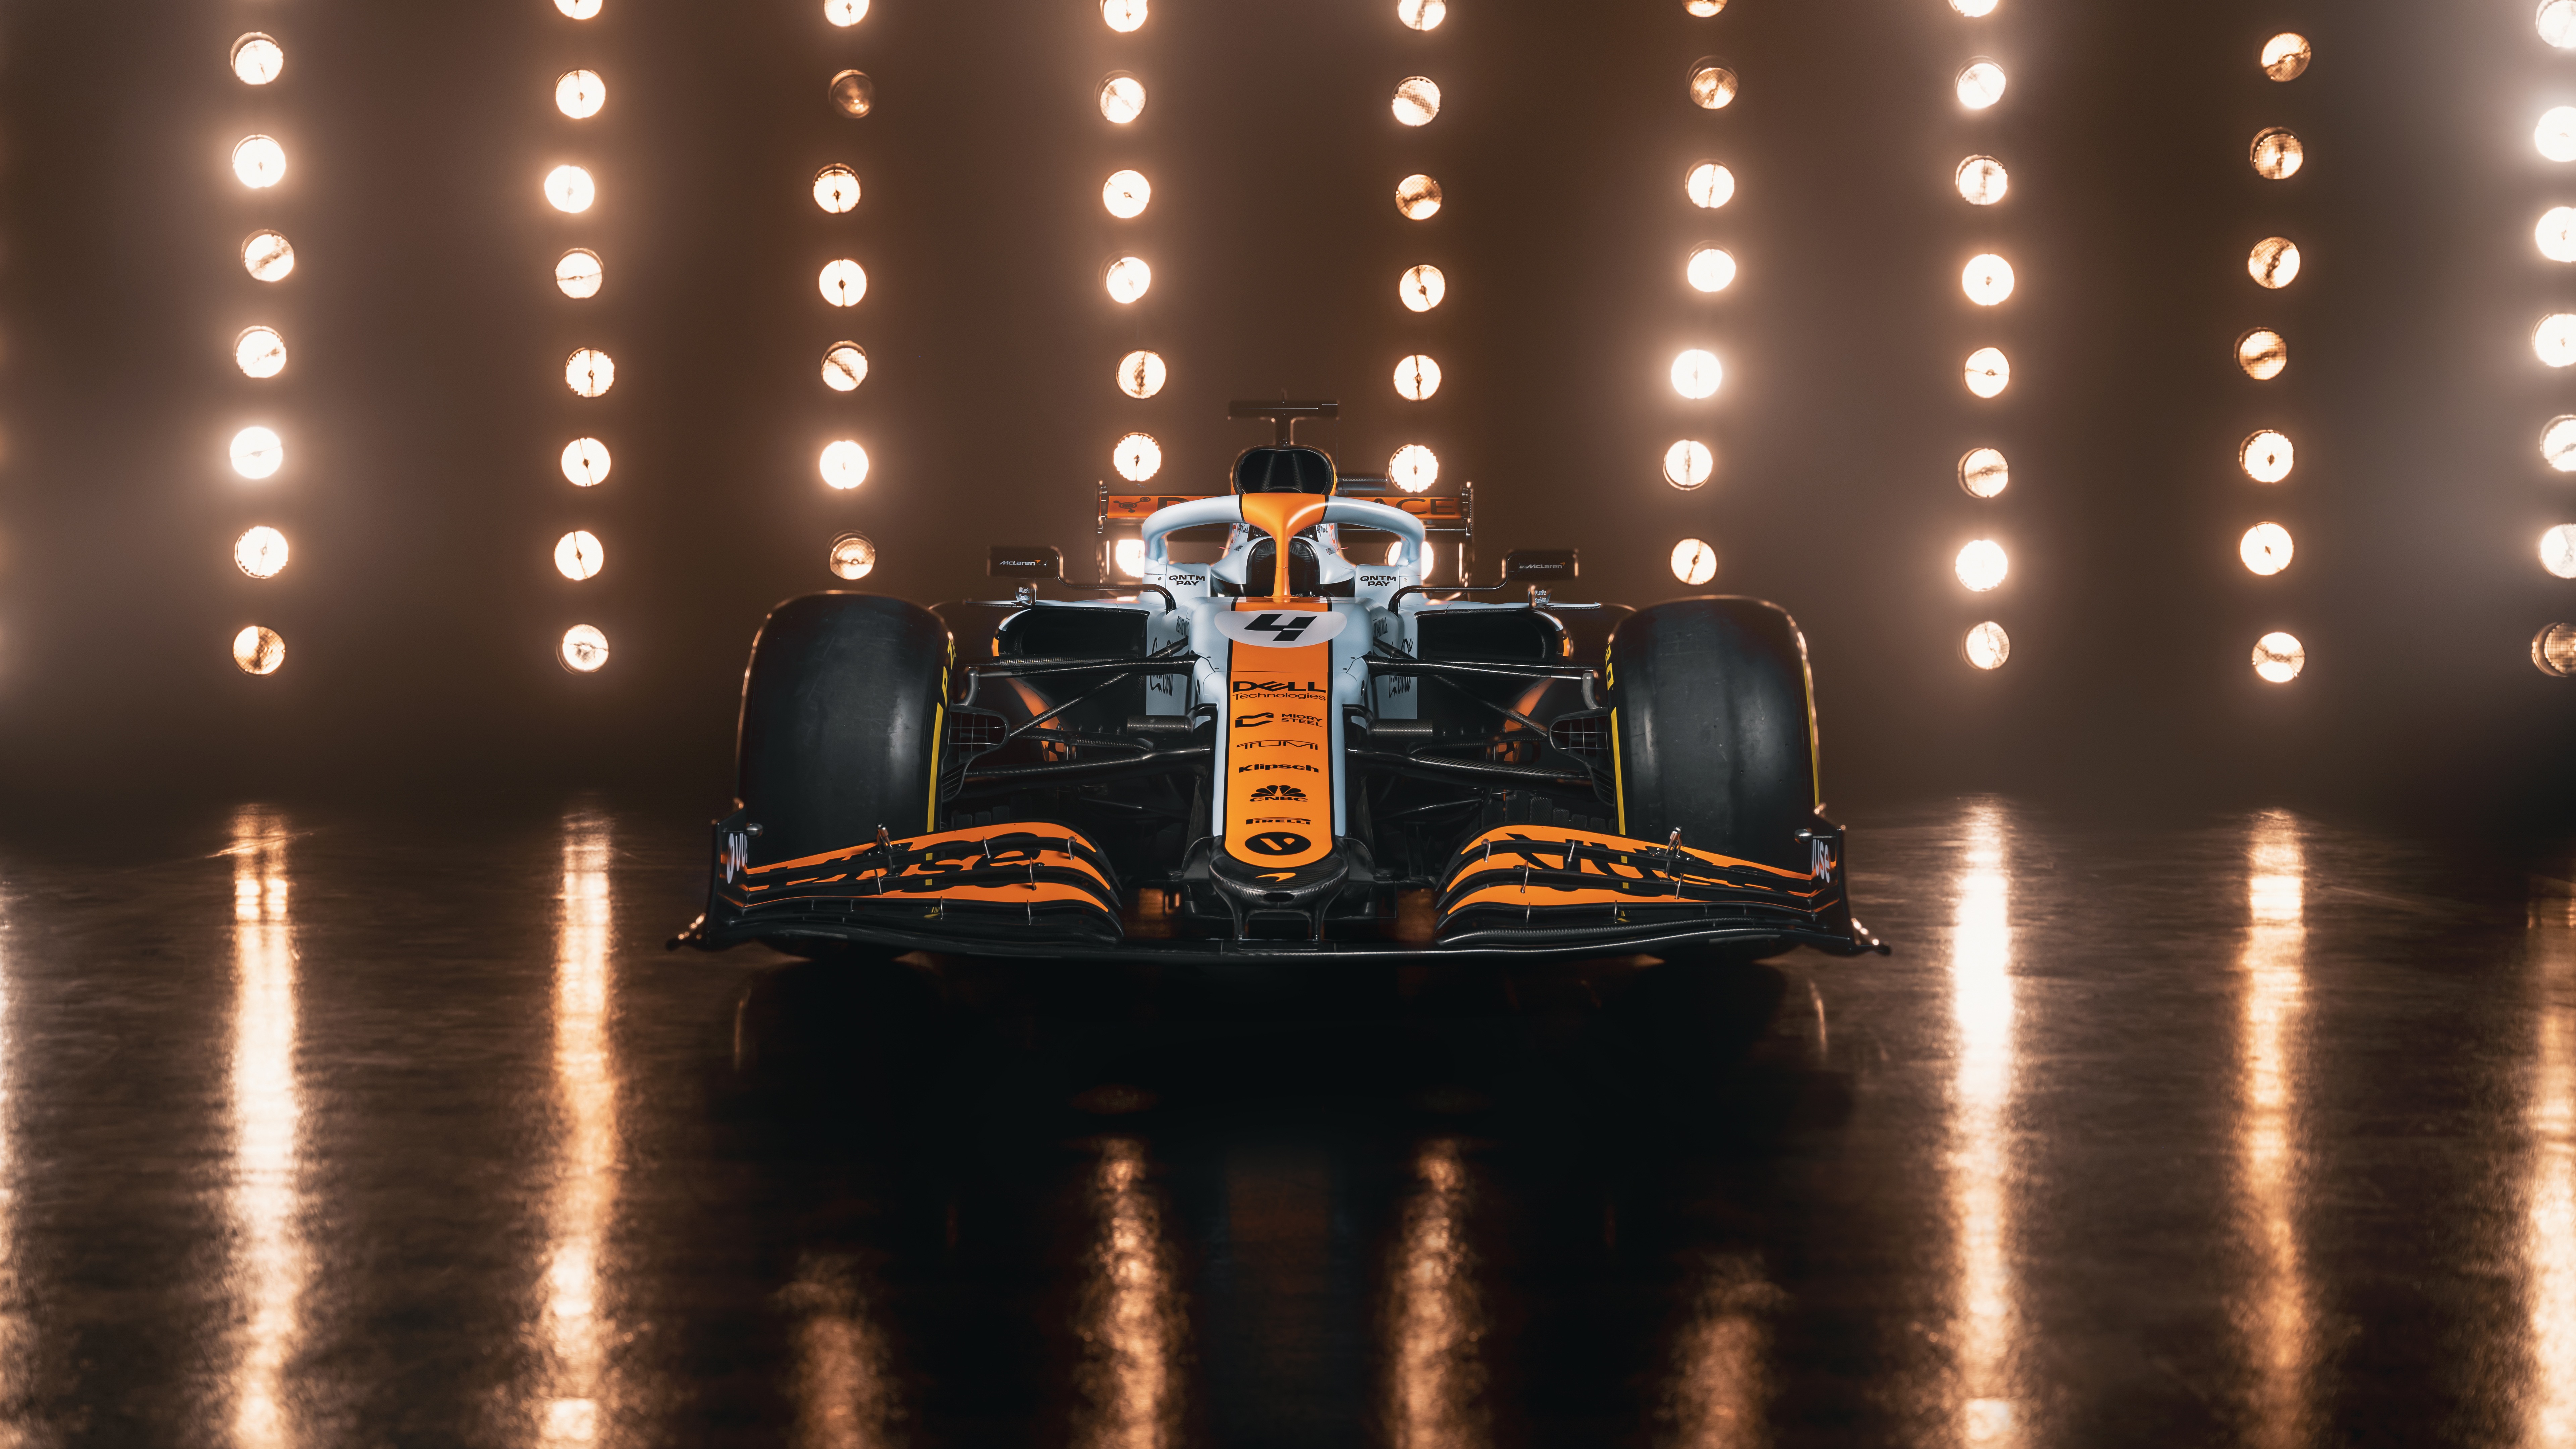 Mclaren Mcl35m With A Special Gulf Livery 4k 8k Wallpaper